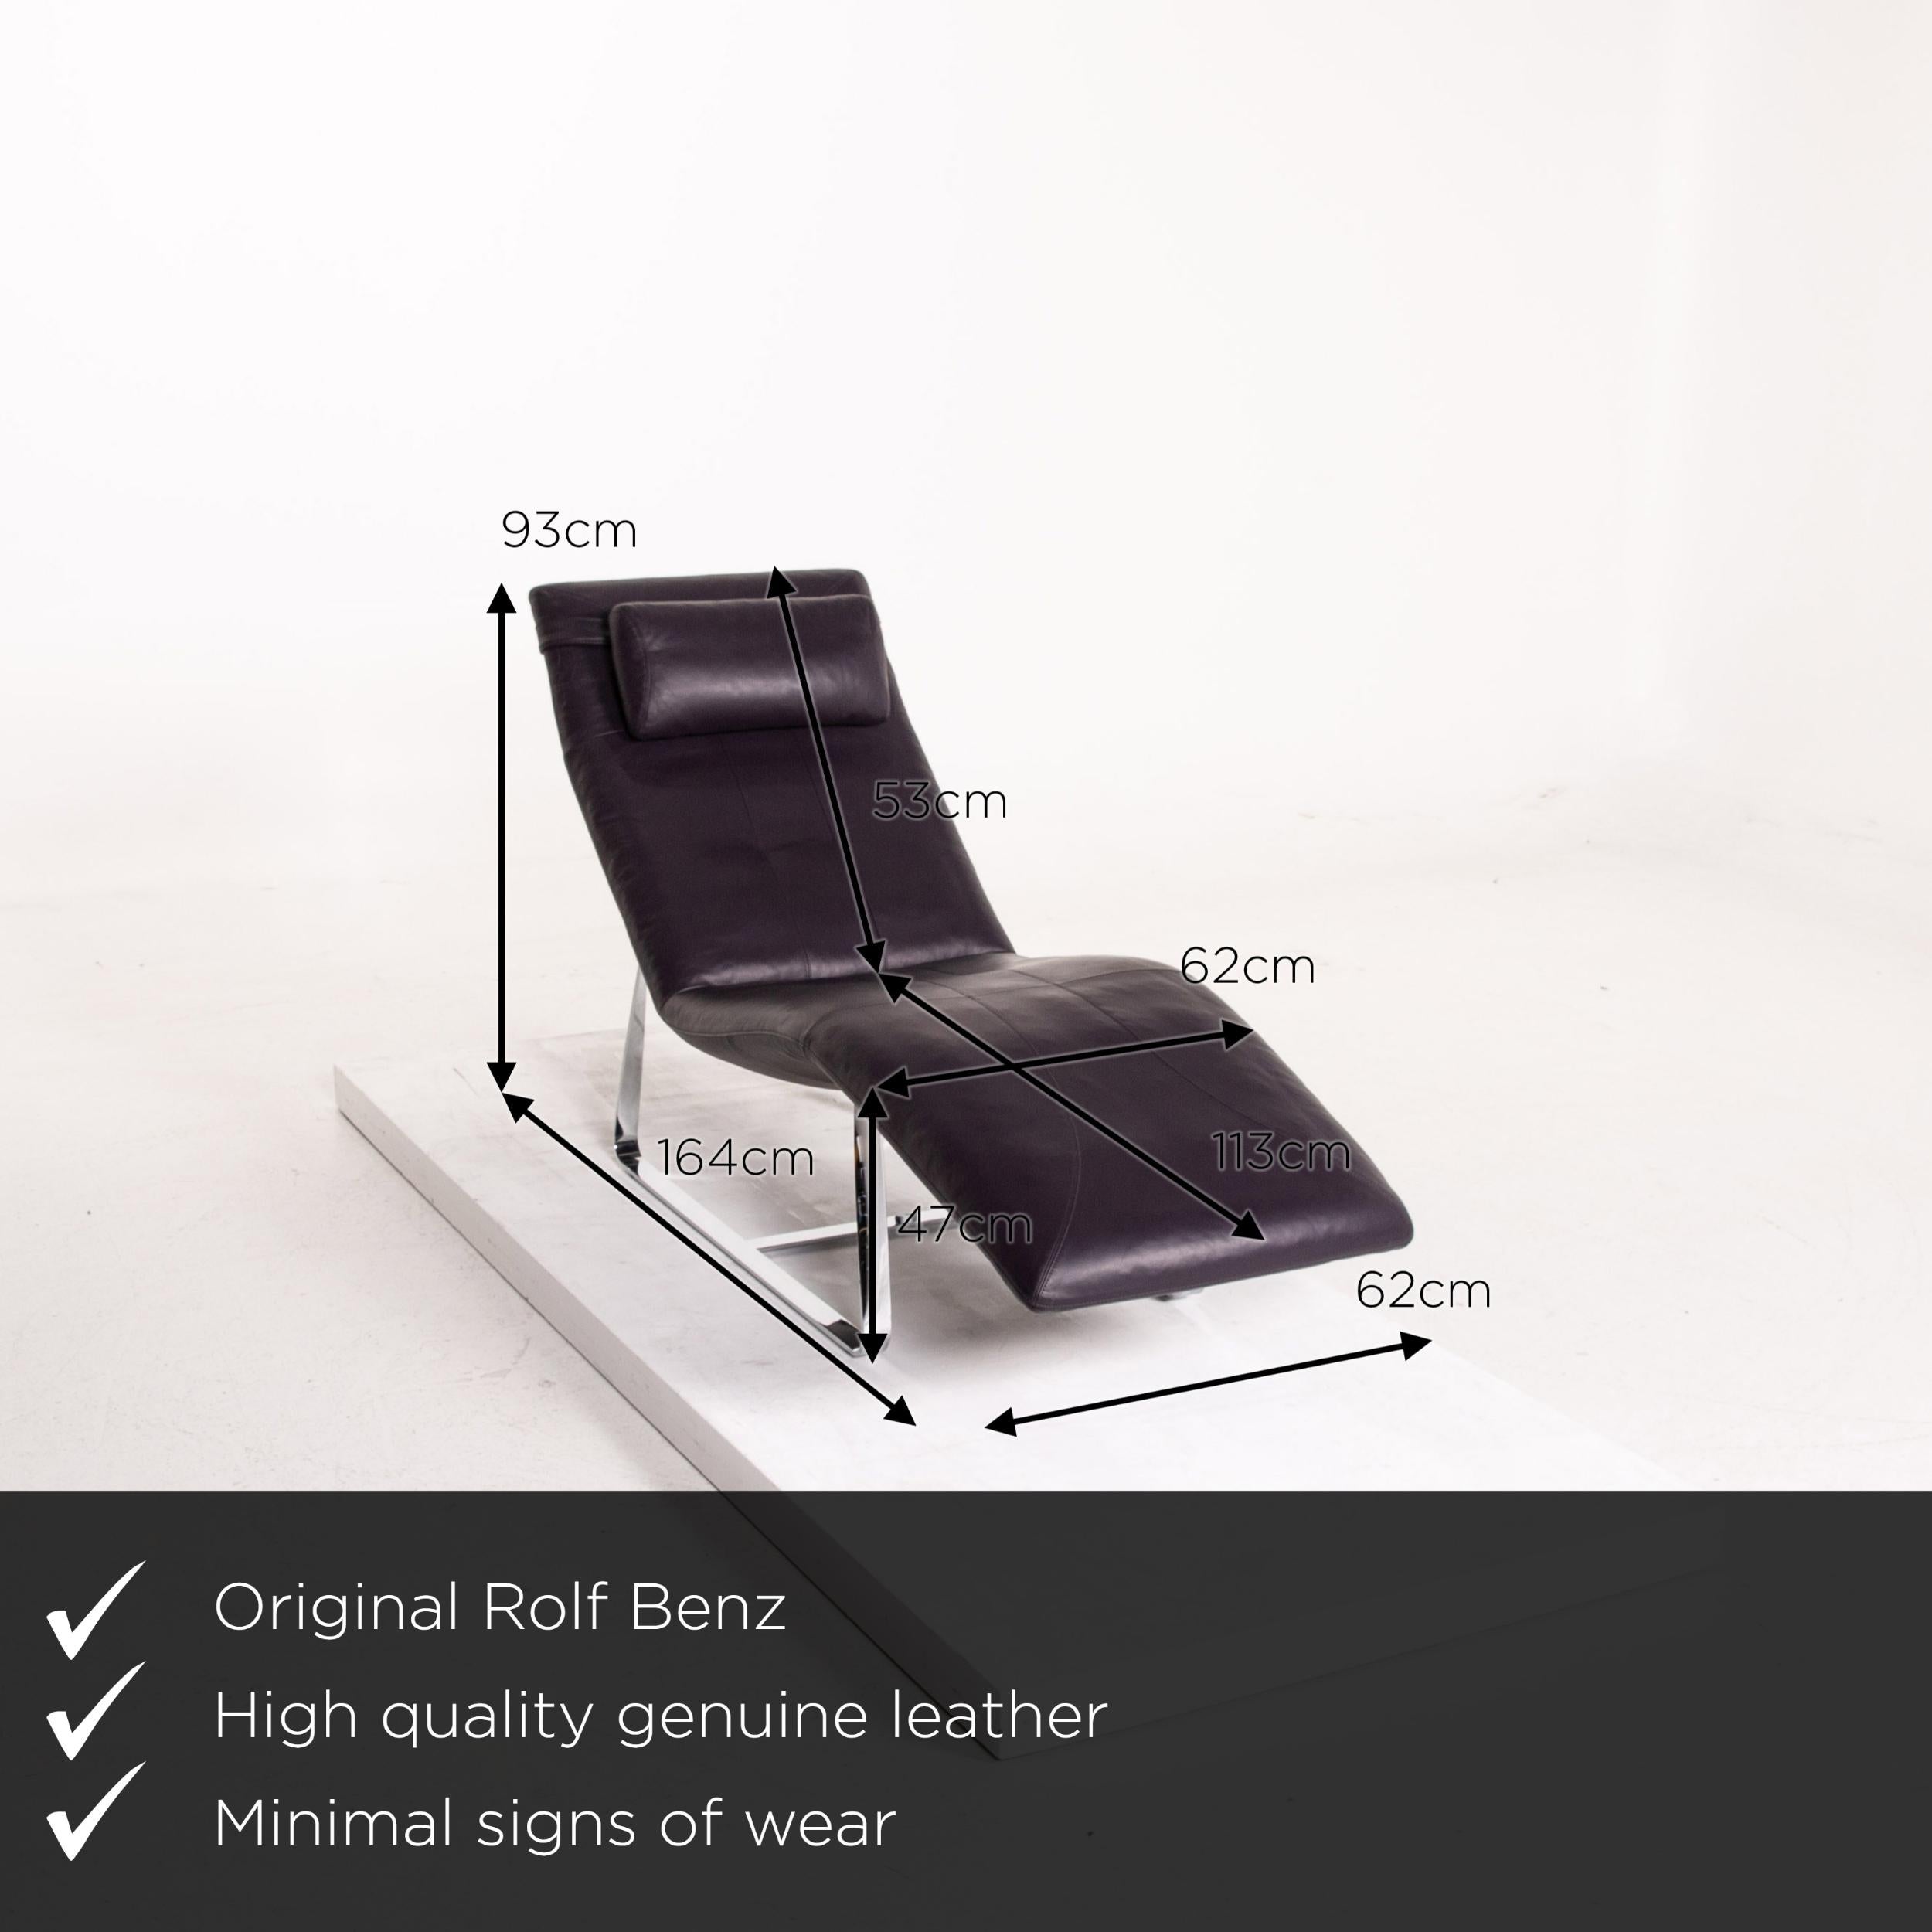 We present to you a Rolf Benz leather lounger violet Relax lounger.

 

 Product measurements in centimeters:
 

Depth 164
Width 62
Height 93
Seat height 47
Seat depth 113
Seat width 62
Back height 53.
  